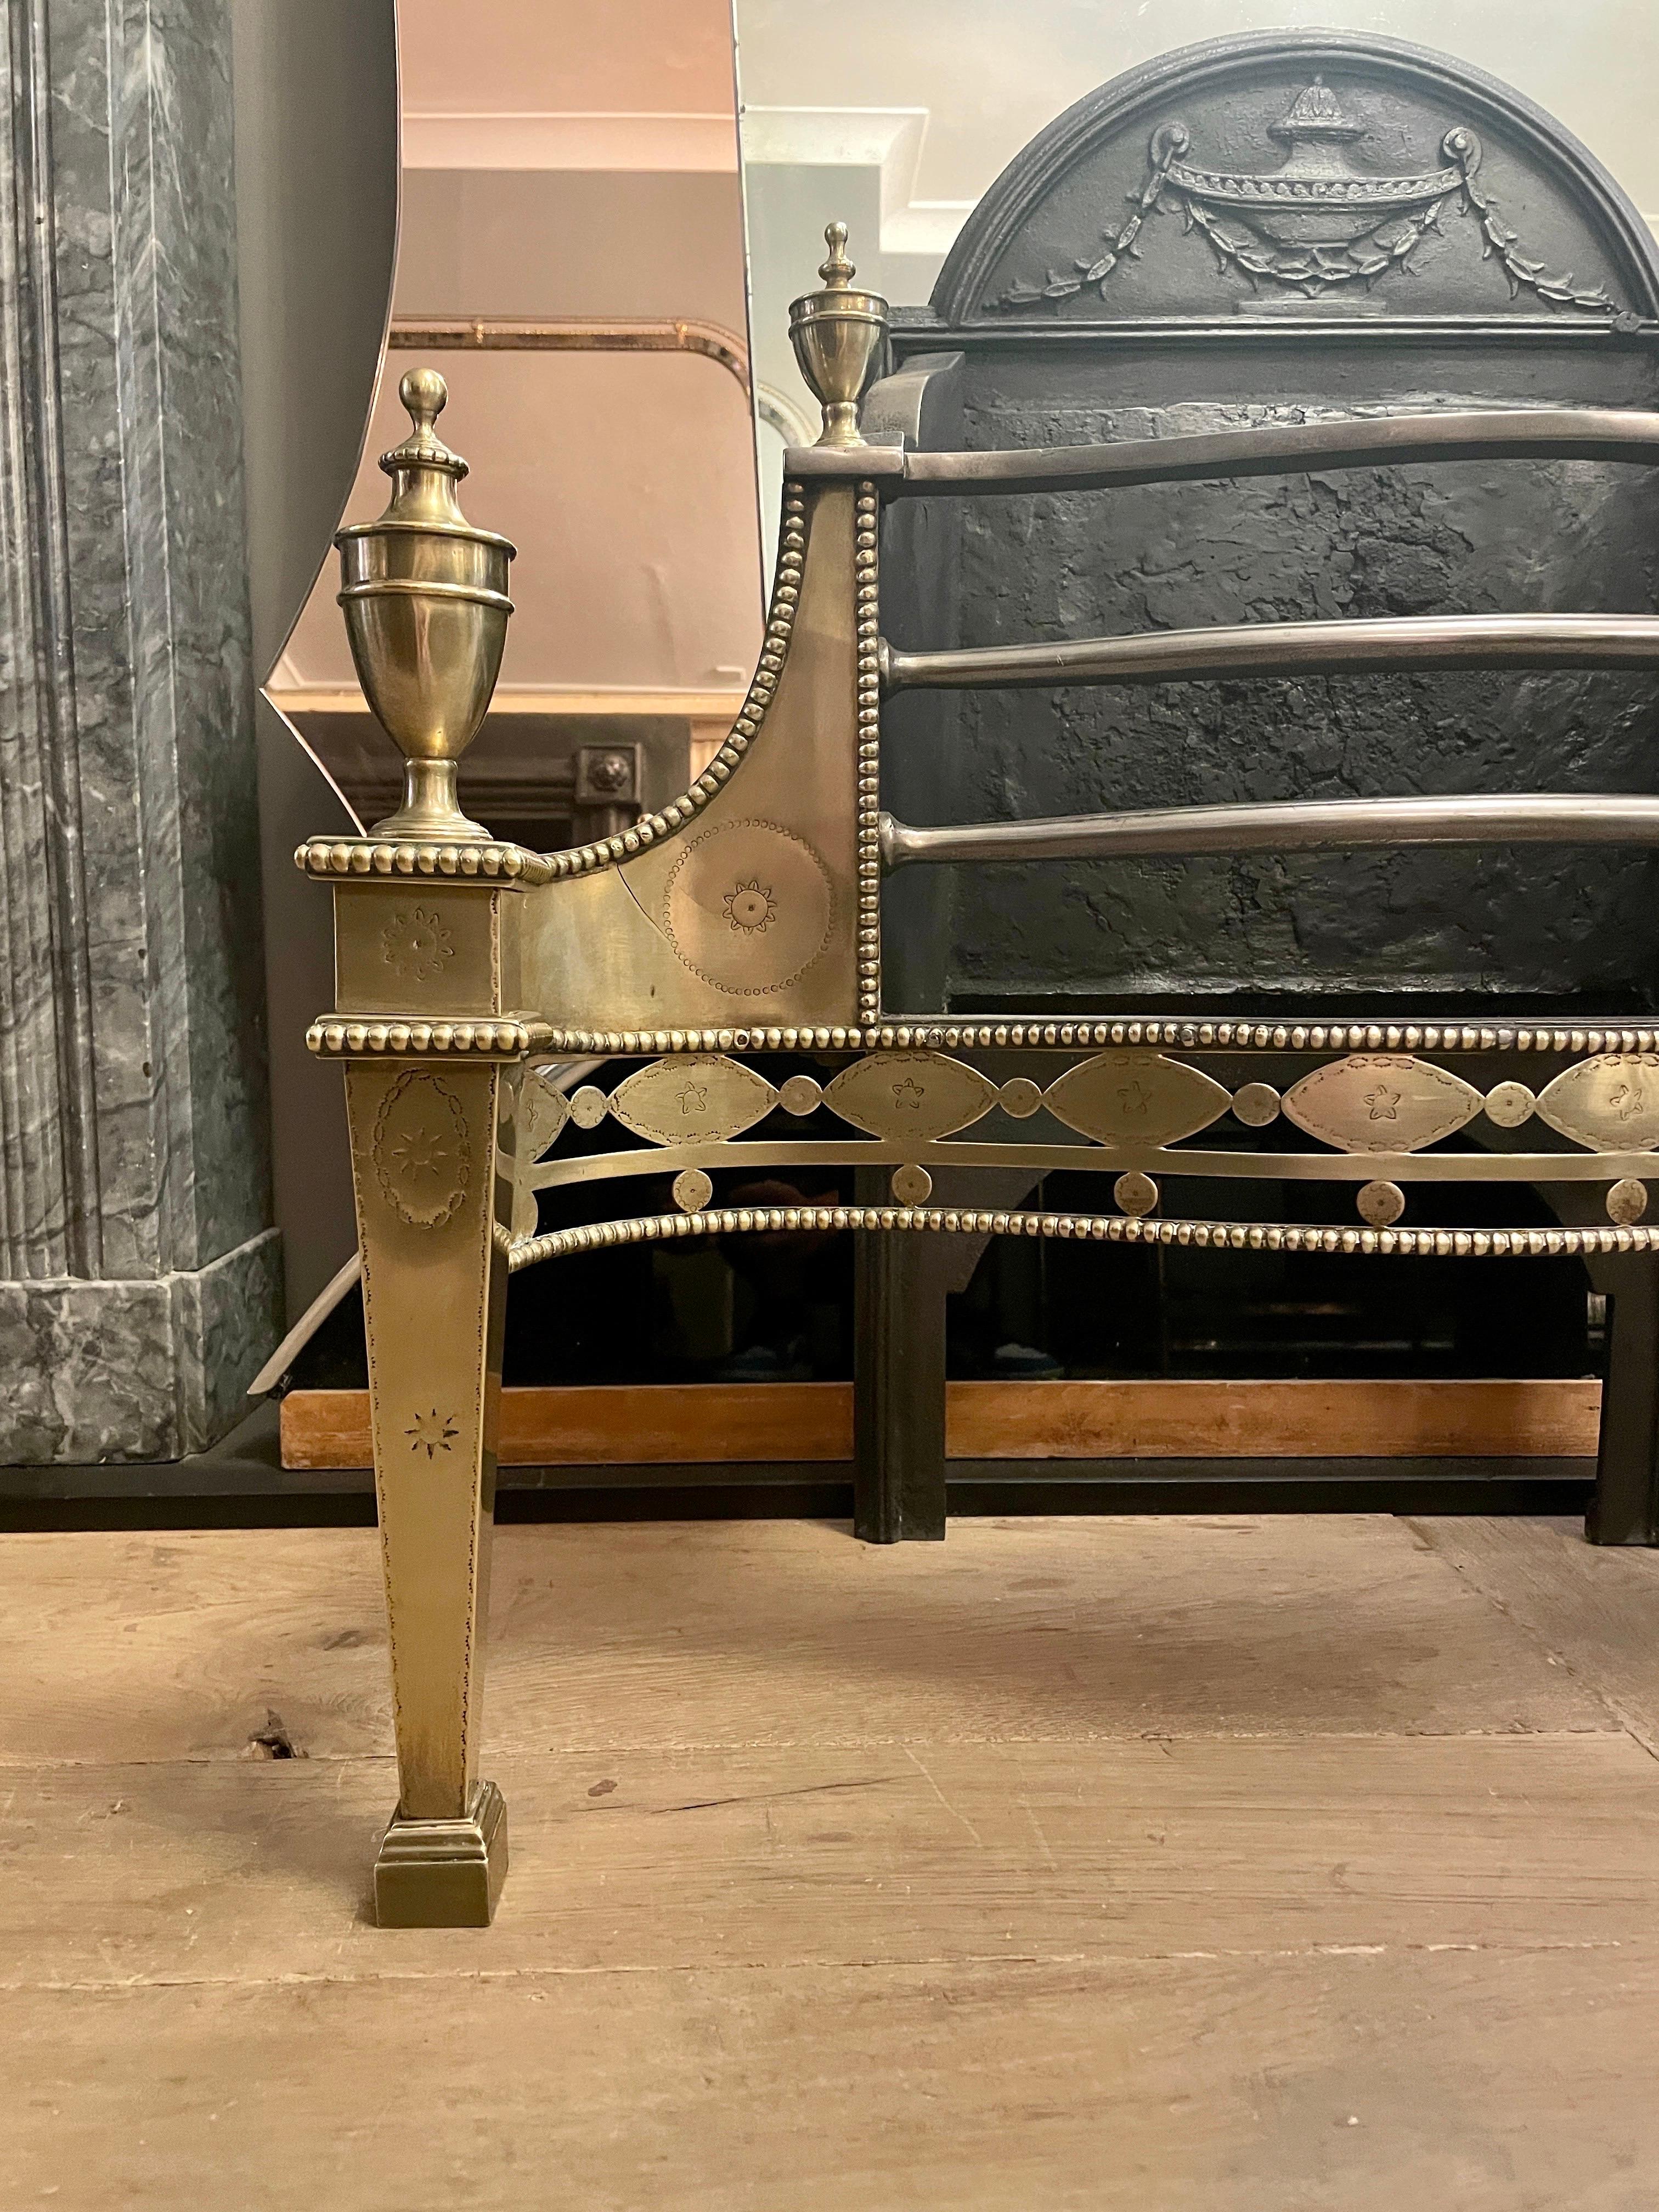 An English Adam style fire grate in polished brass and wrought iron by 19th century renowned blacksmith Thomas Elsley. The ornate cut and pierced fret work beneath bowed wrought iron bars, flanked by brass wings. The supports tapering with matching